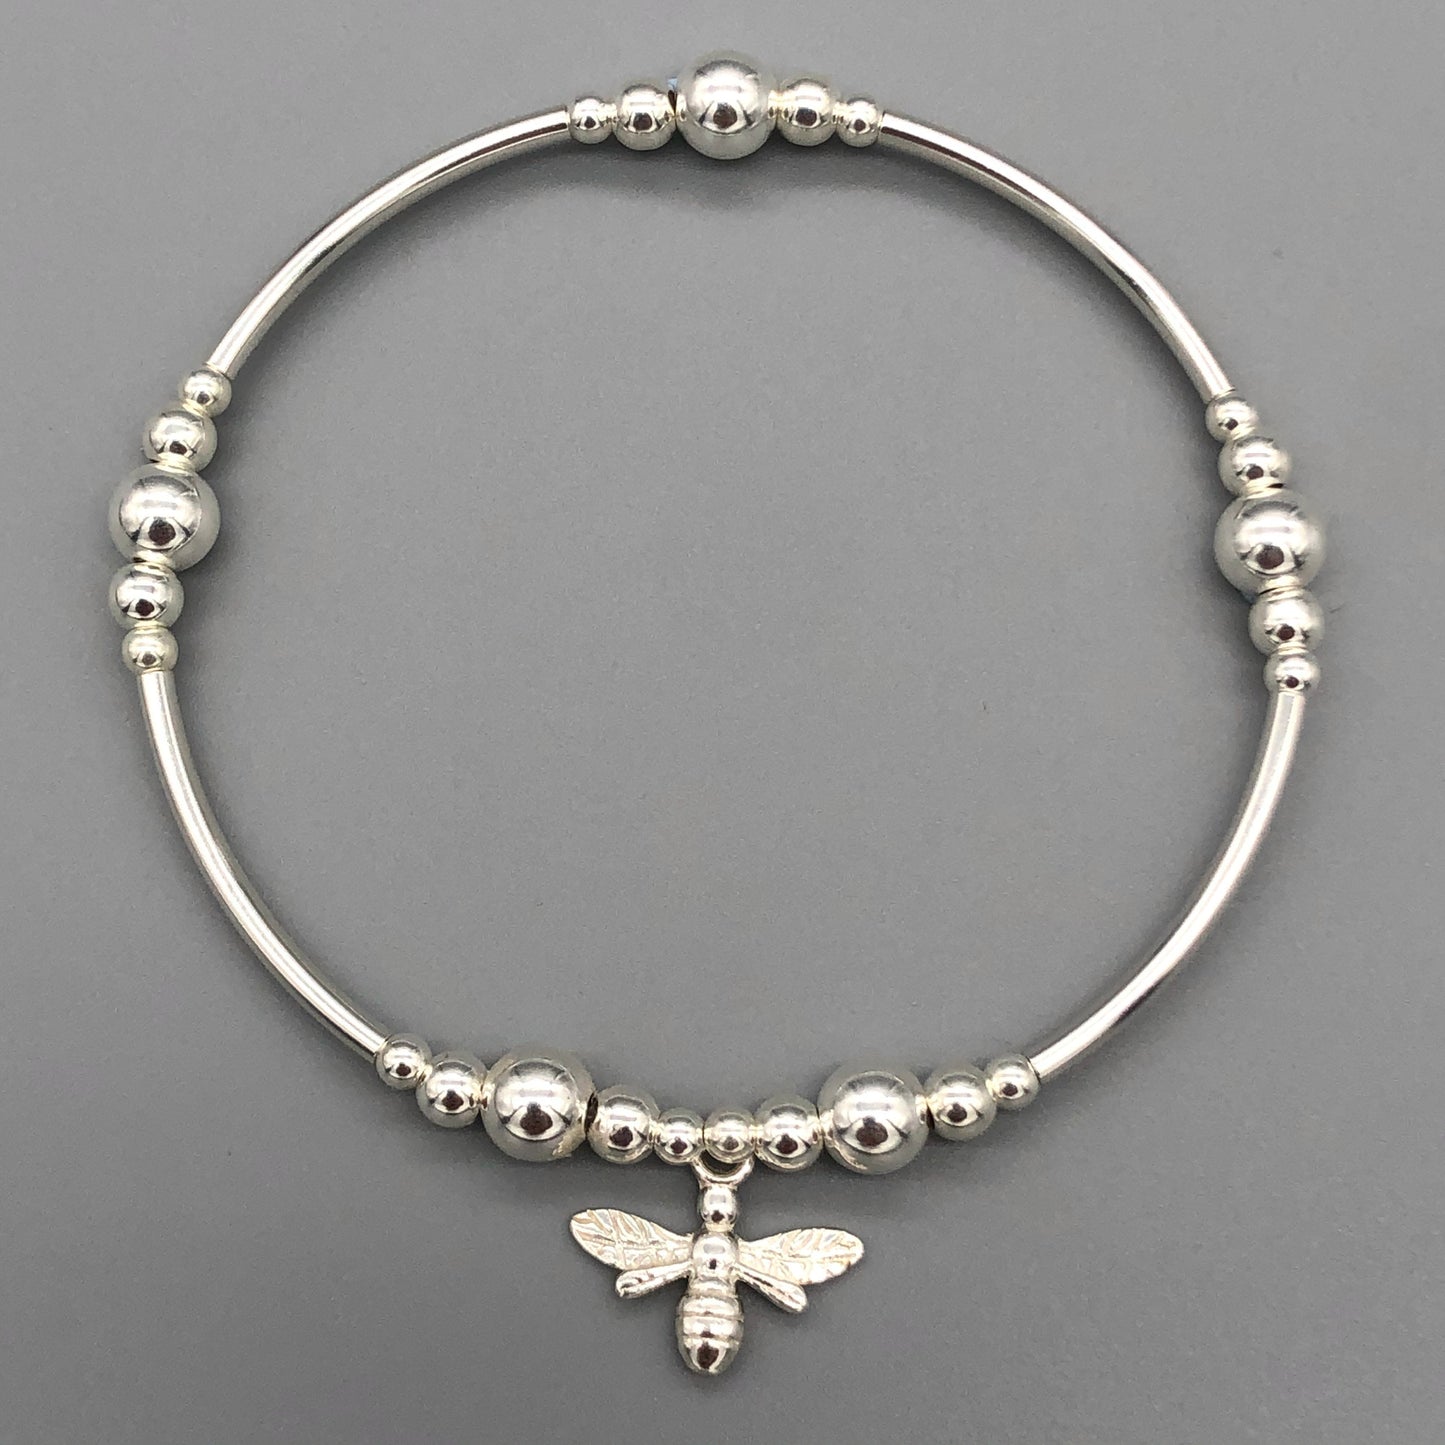 Bee charm women's sterling silver stacking stretch bracelet by My Silver Wish